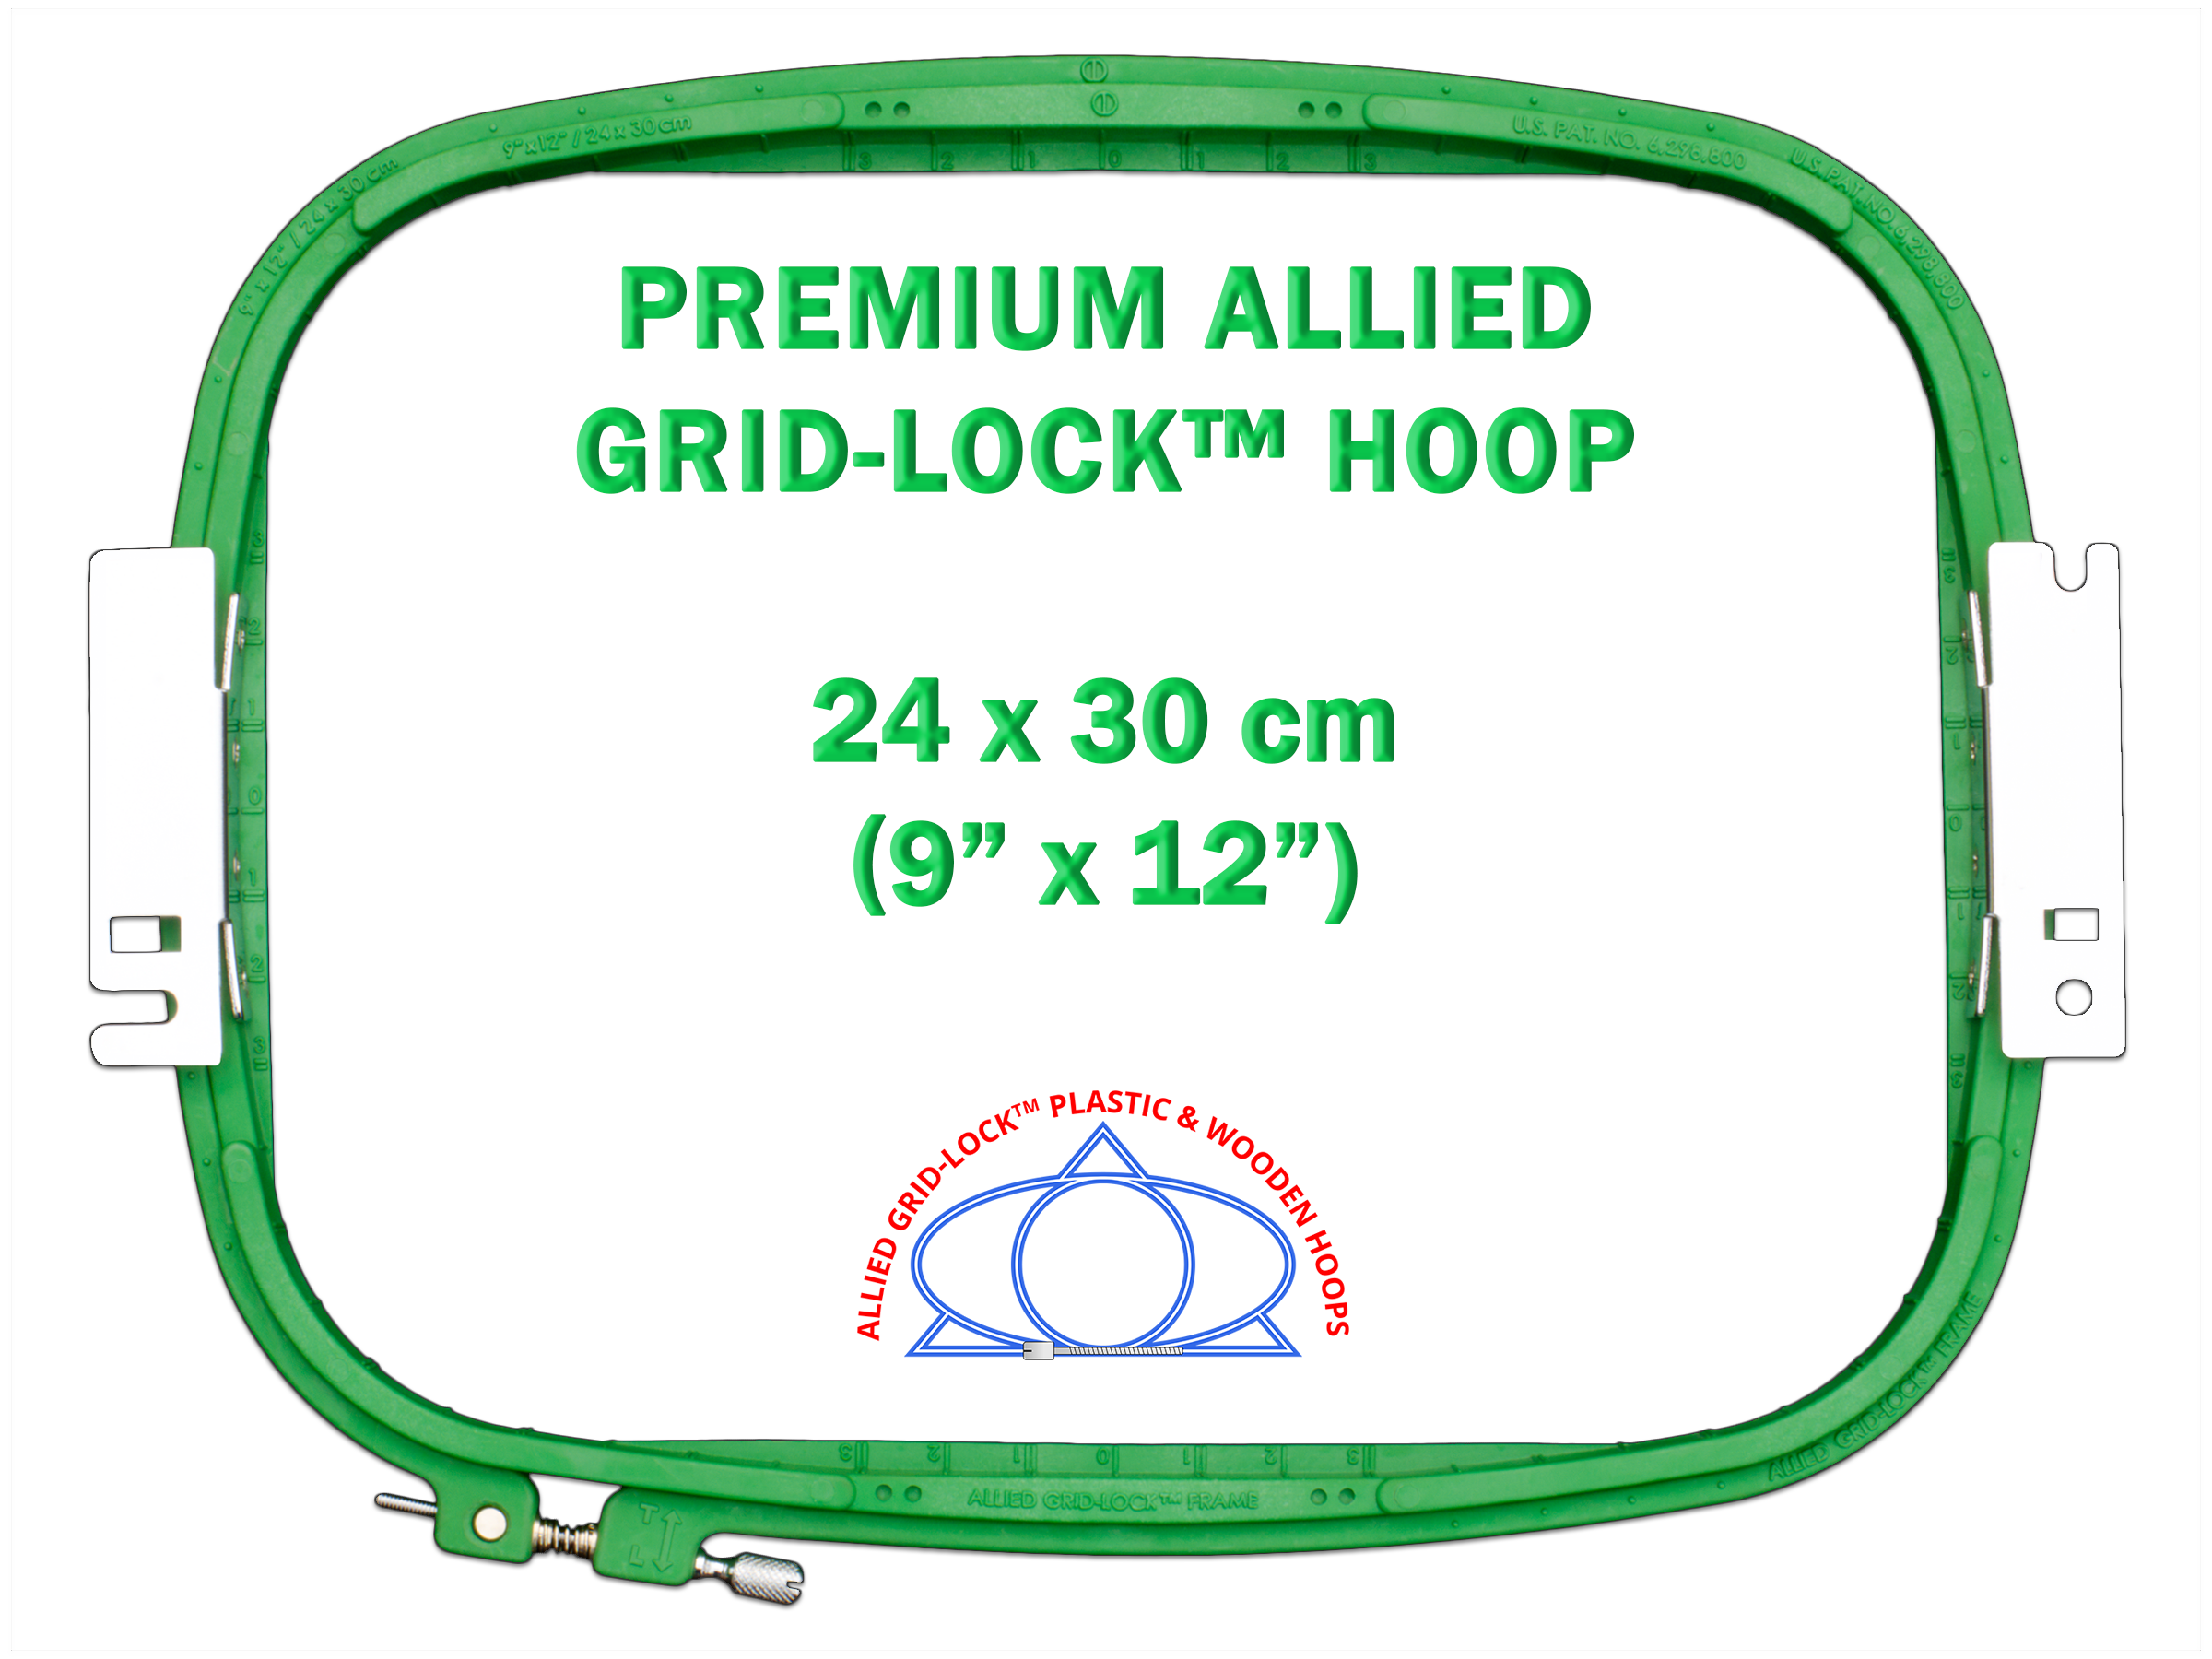 What is the maximum design size for this hoop?